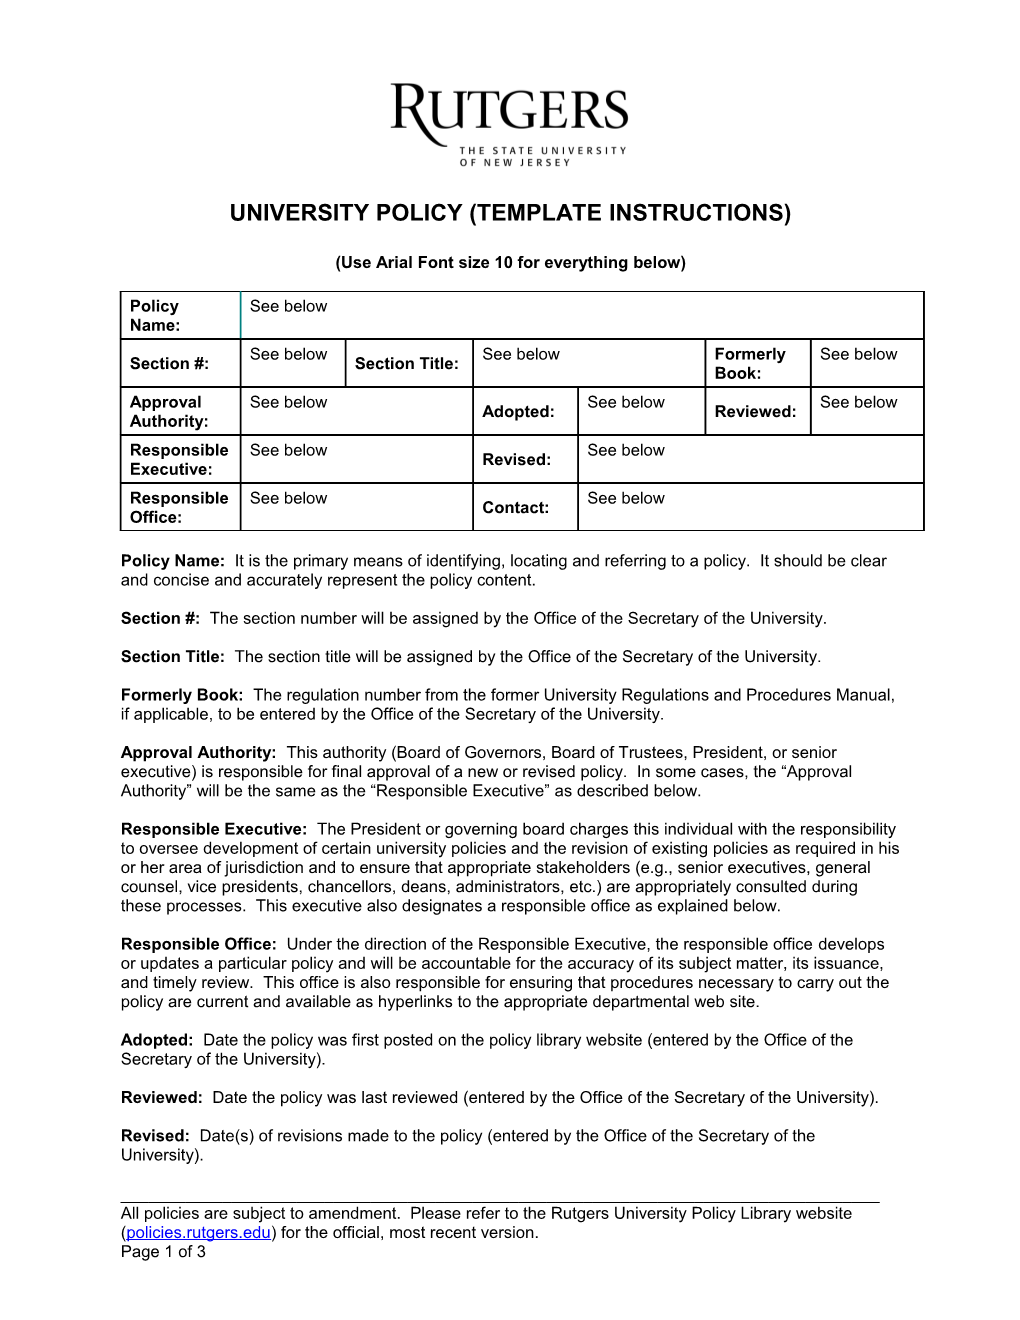 University Policy (Template Instructions)